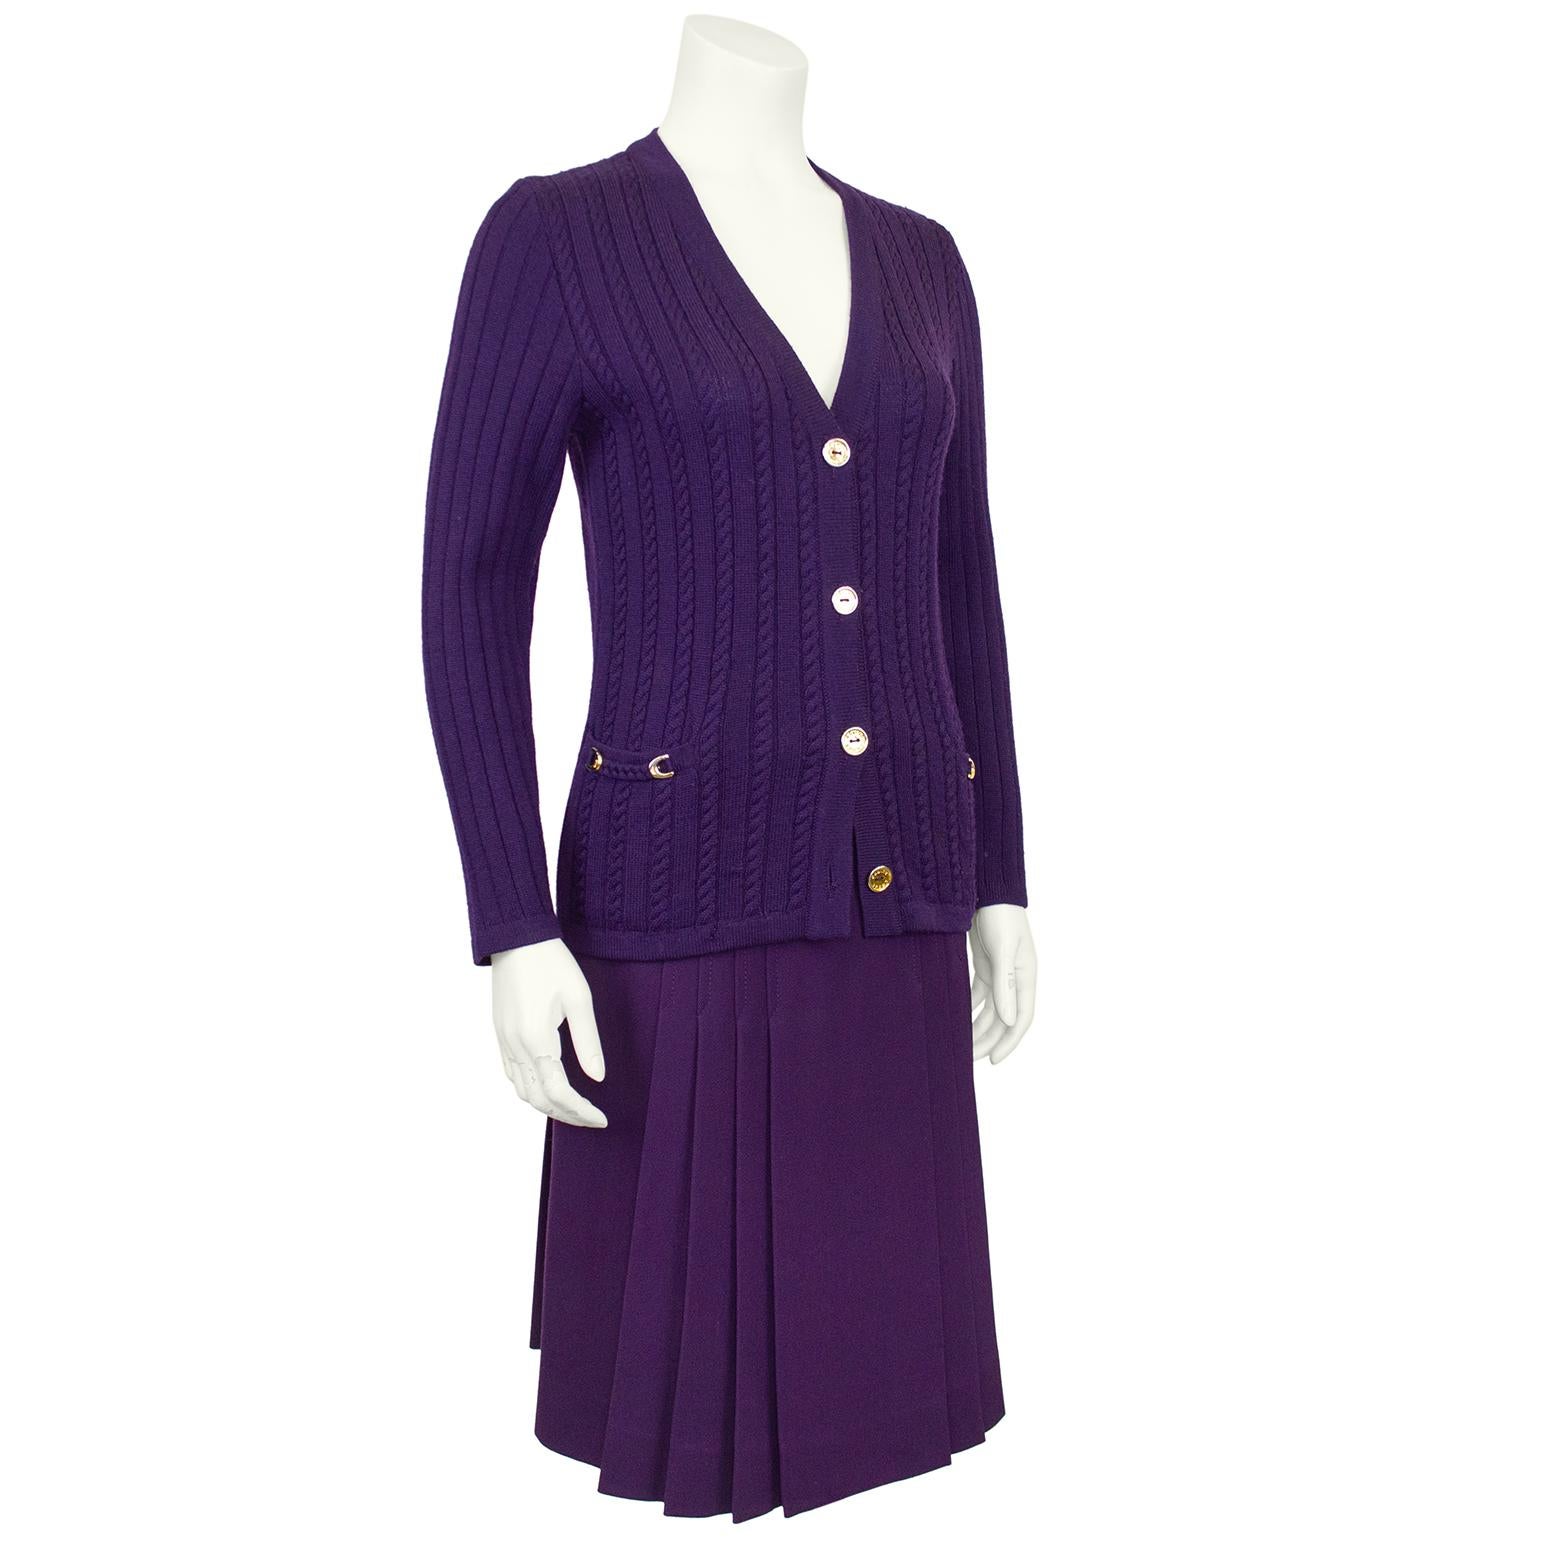 Classic and timeless Celine 100% wool jewel tone purple cardigan and gabardine skirt ensemble from the 1970's. The set features a cable knit and waffle cardigan with braided trim and gold tone metal horse shoes at the pockets. The pleated skirt is